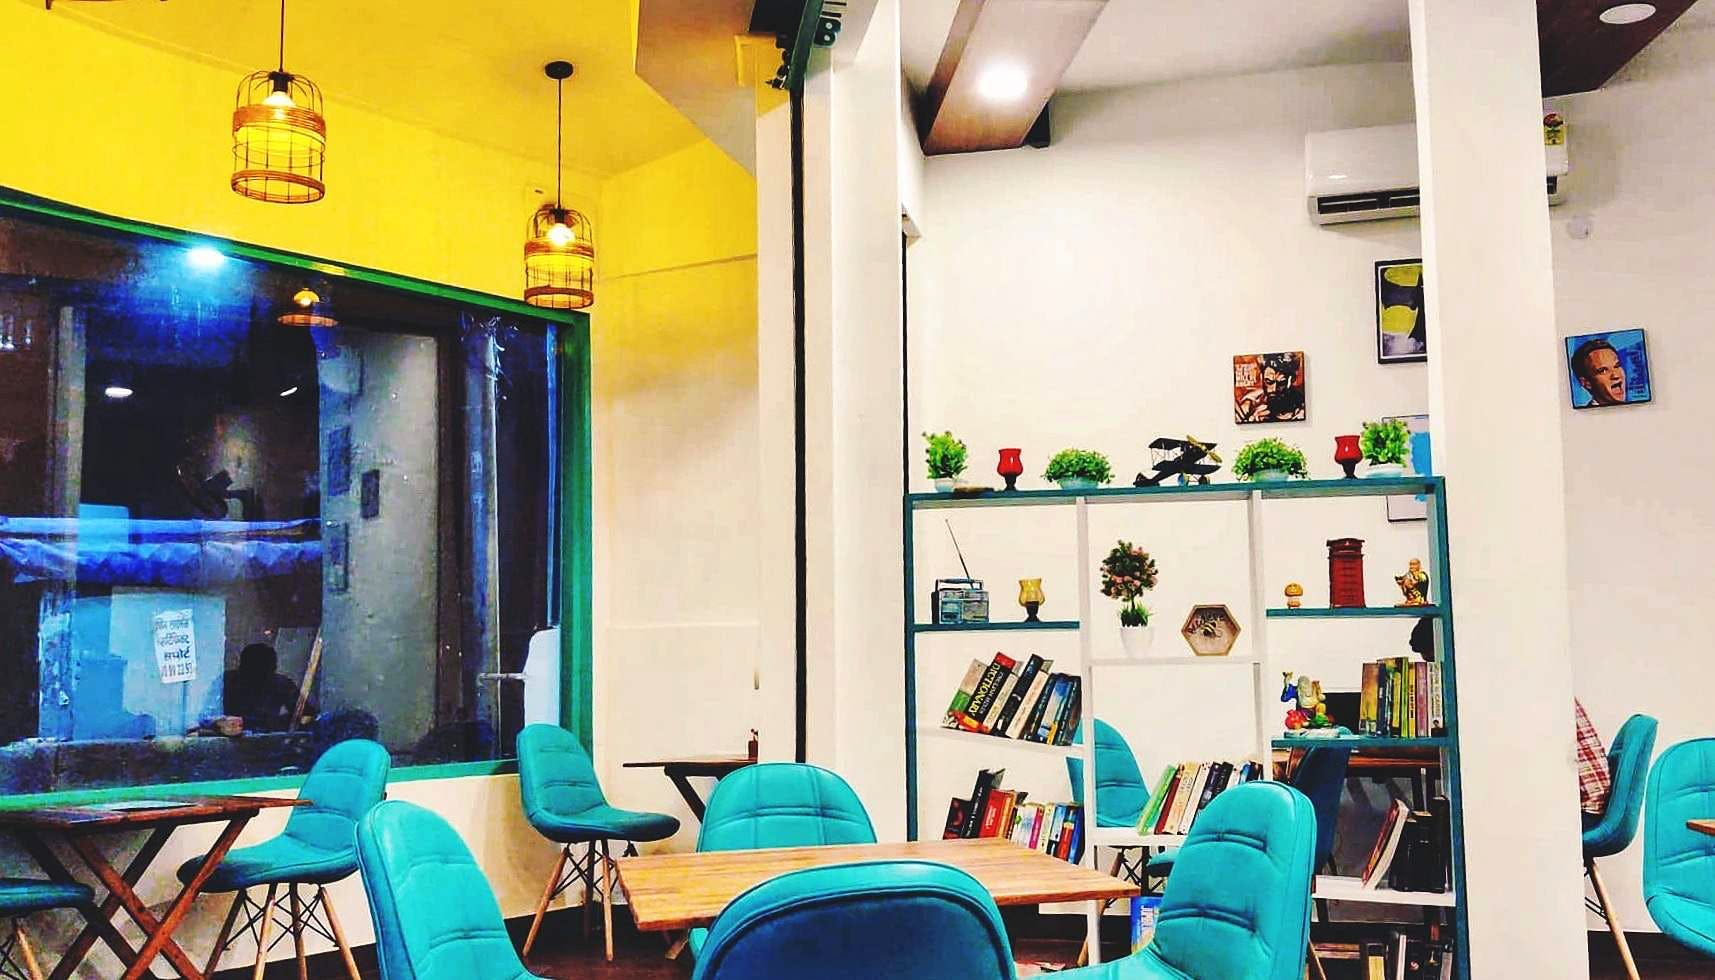 Green,Room,Interior design,Turquoise,Yellow,Building,Furniture,Architecture,Table,House